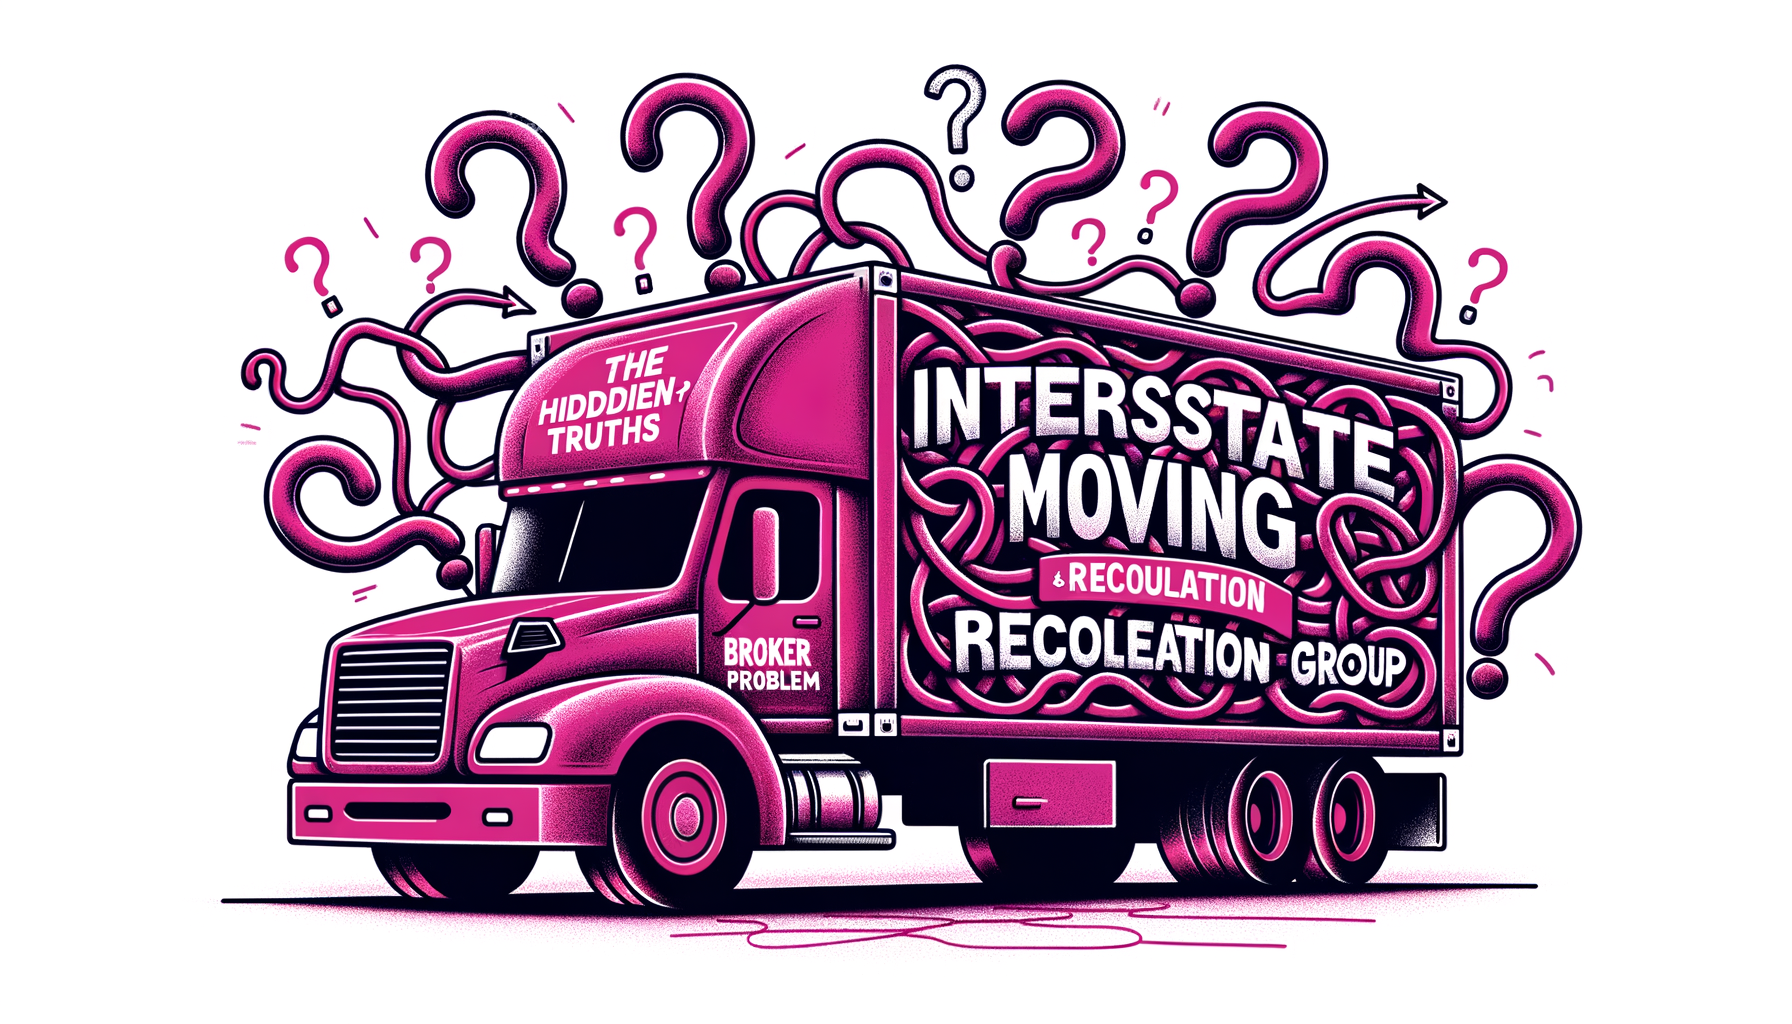 Cartoon illustration of a fuschia moving truck with tangled route lines and question marks, symbolizing the complexities and undisclosed realities of using brokers in the interstate moving and relocation industry.